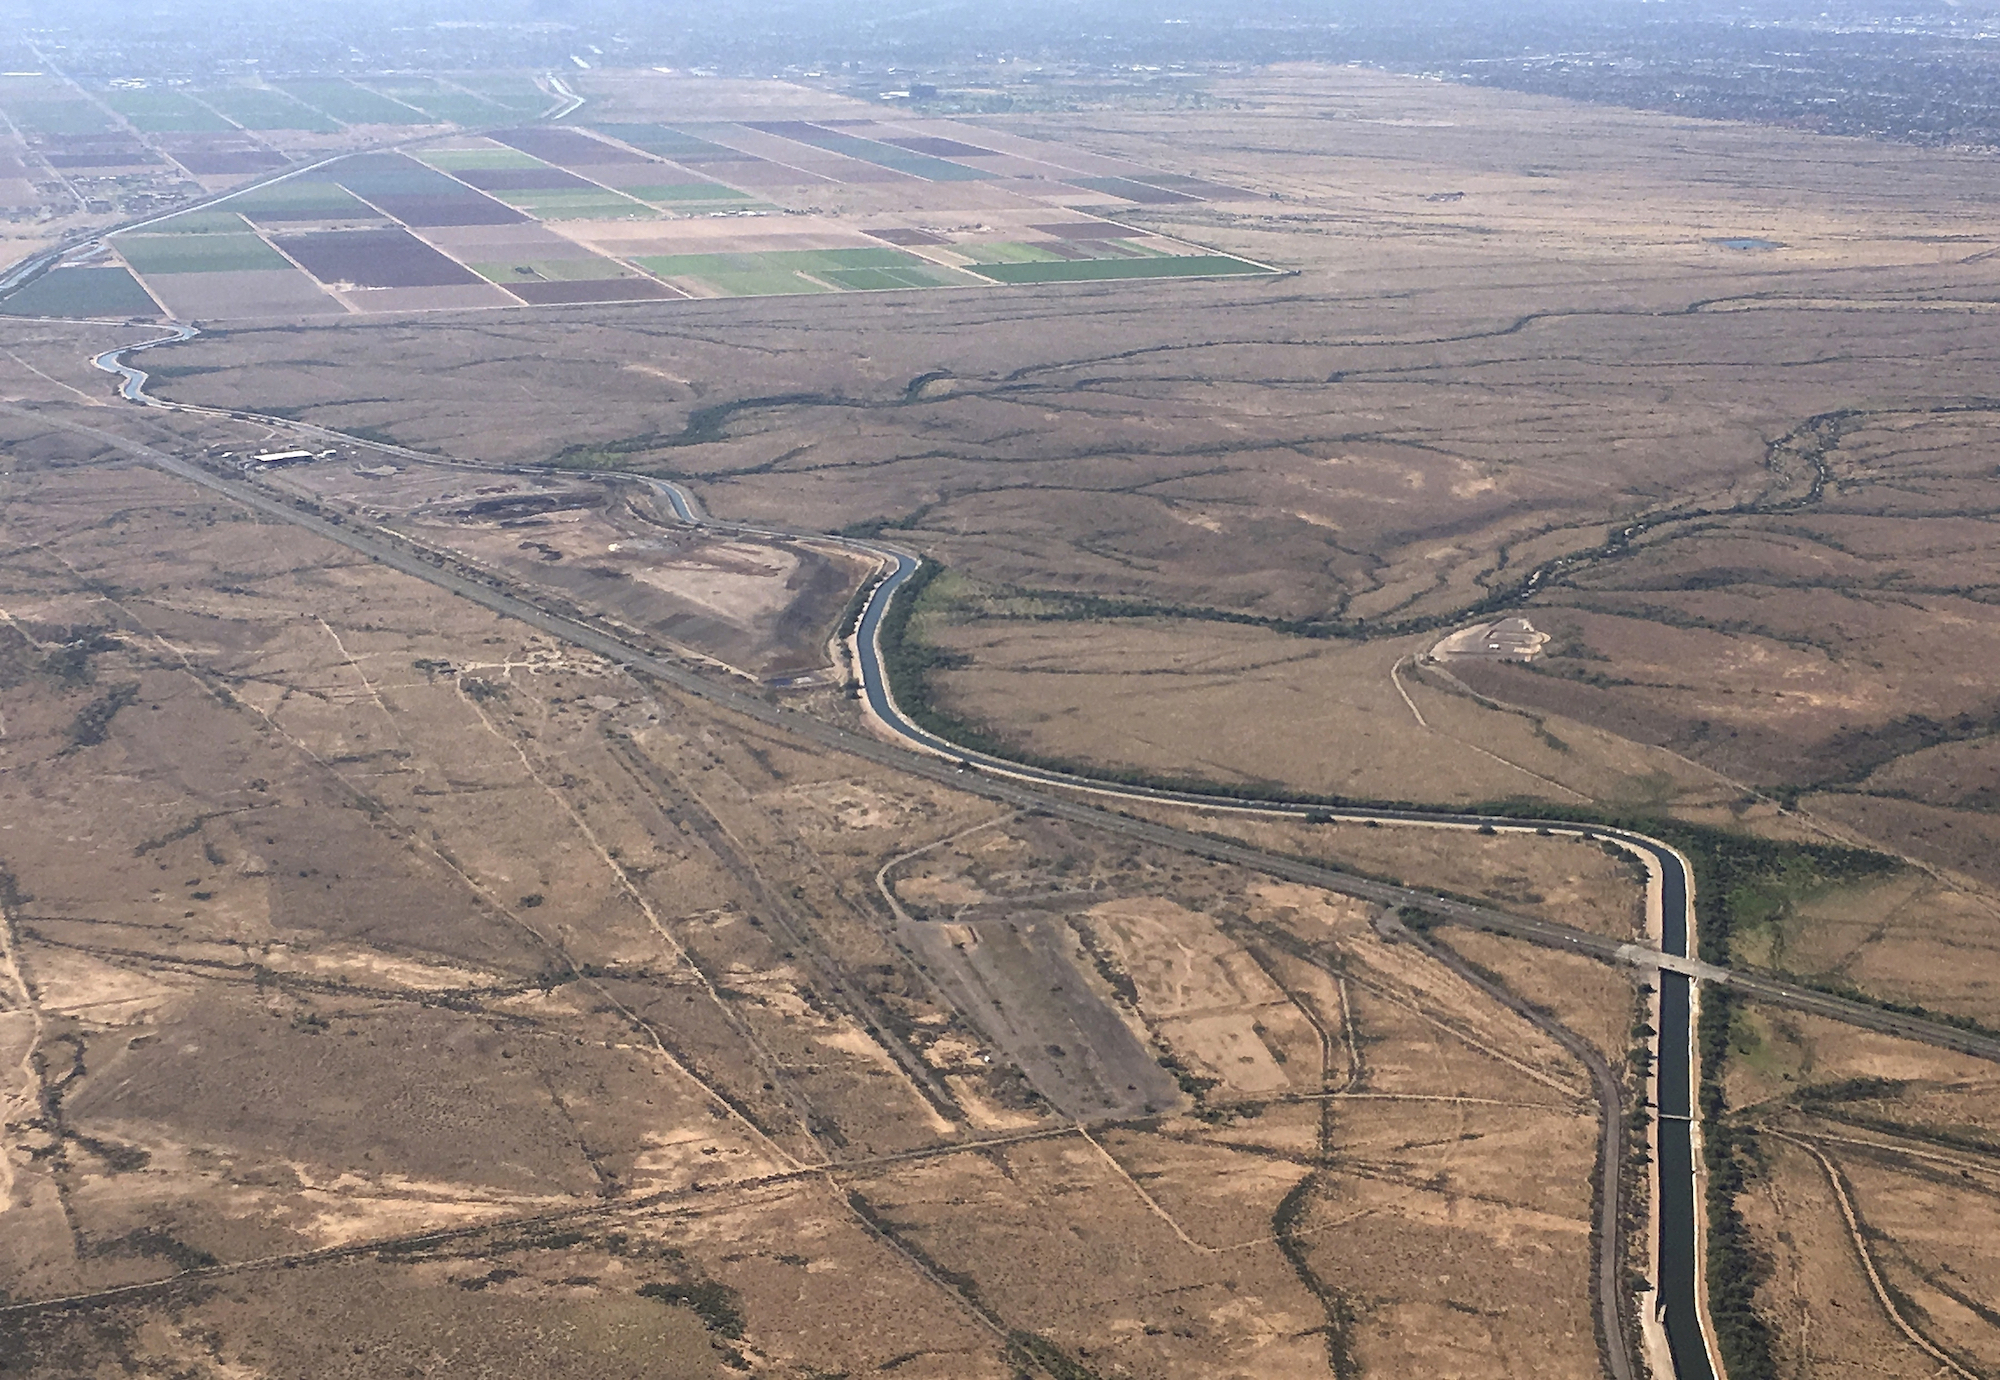 an aerial view of a winding canal through brown, dry hills